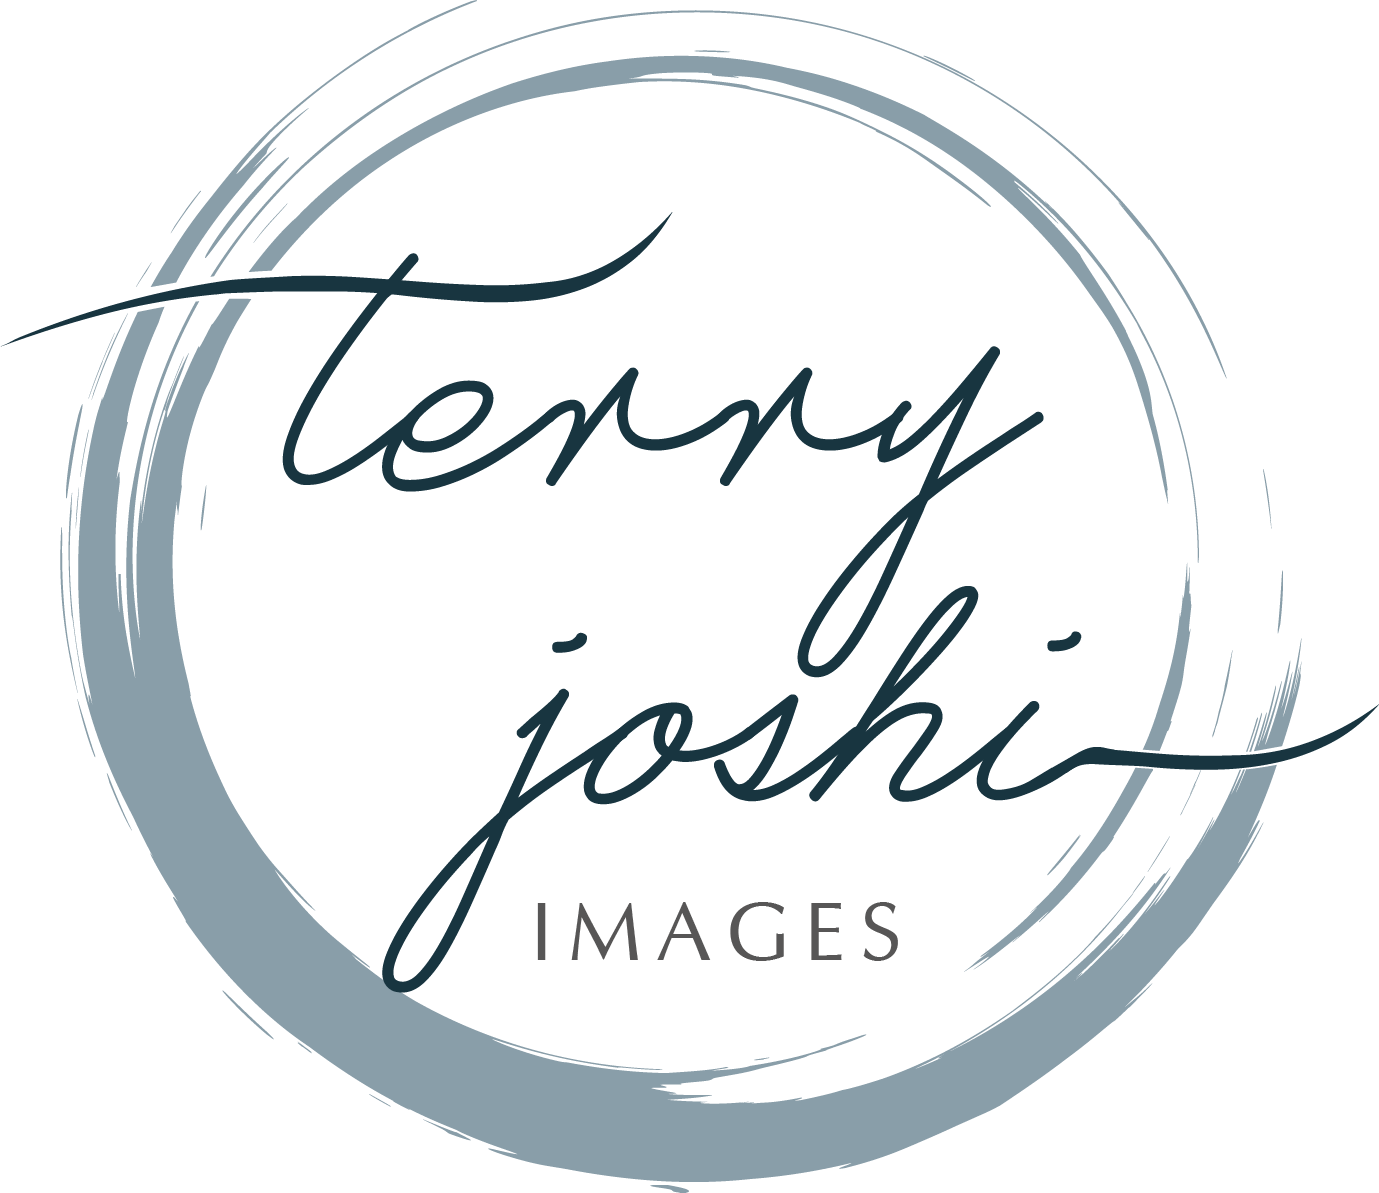 Terry Joshi Images